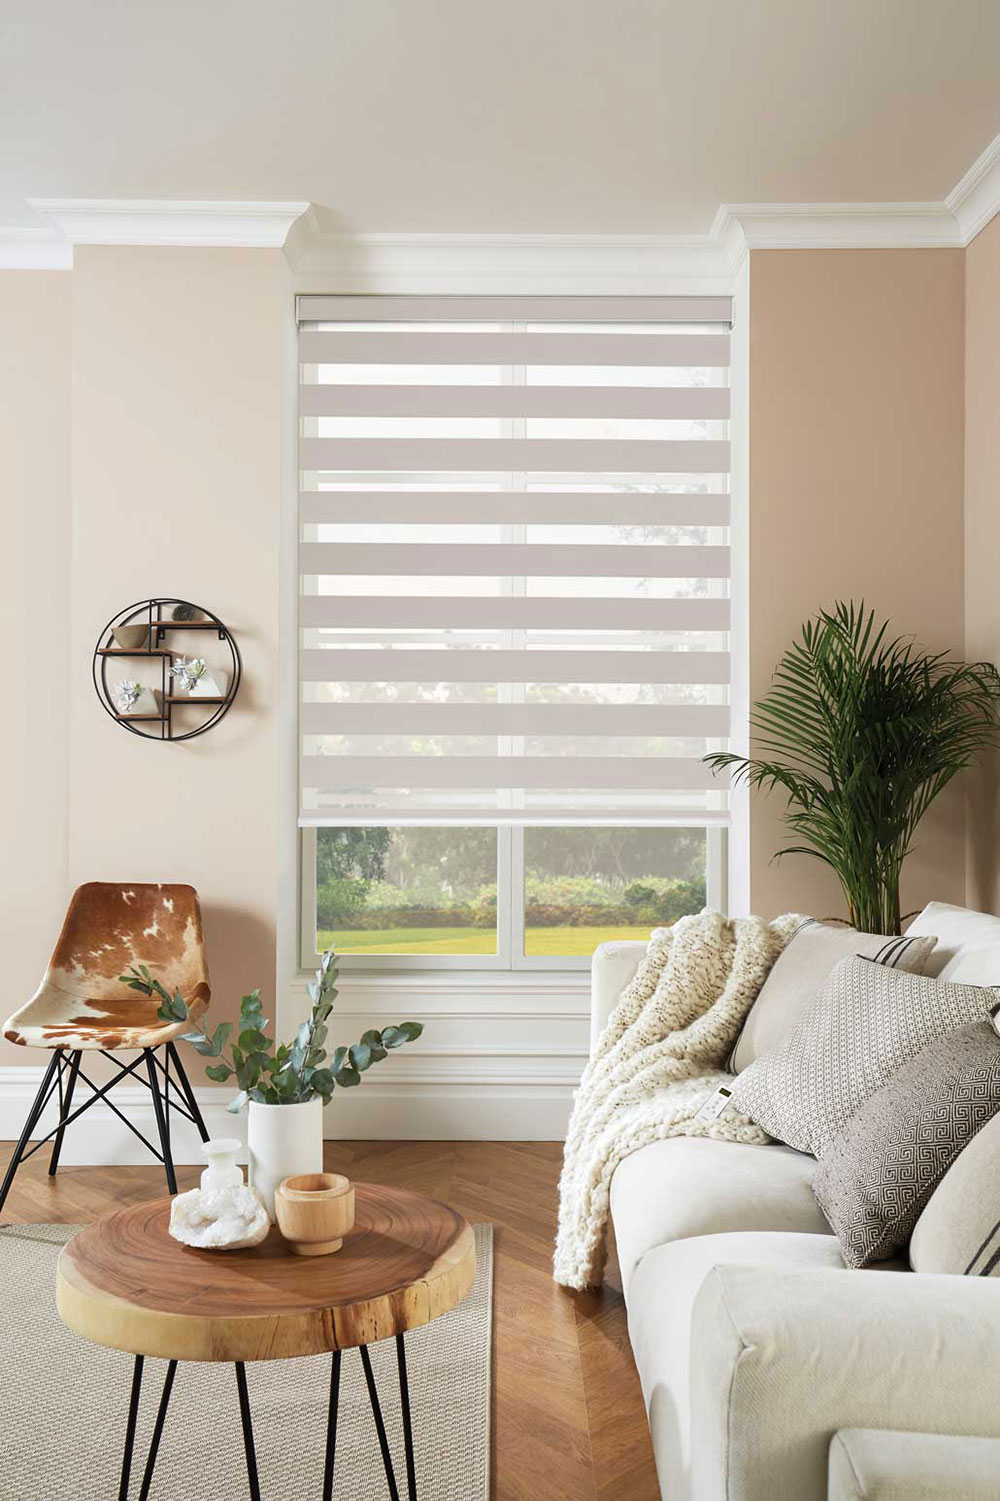 Cream coloured Duo Vision blinds shown with the opaque layers aligned in a three quarters down position